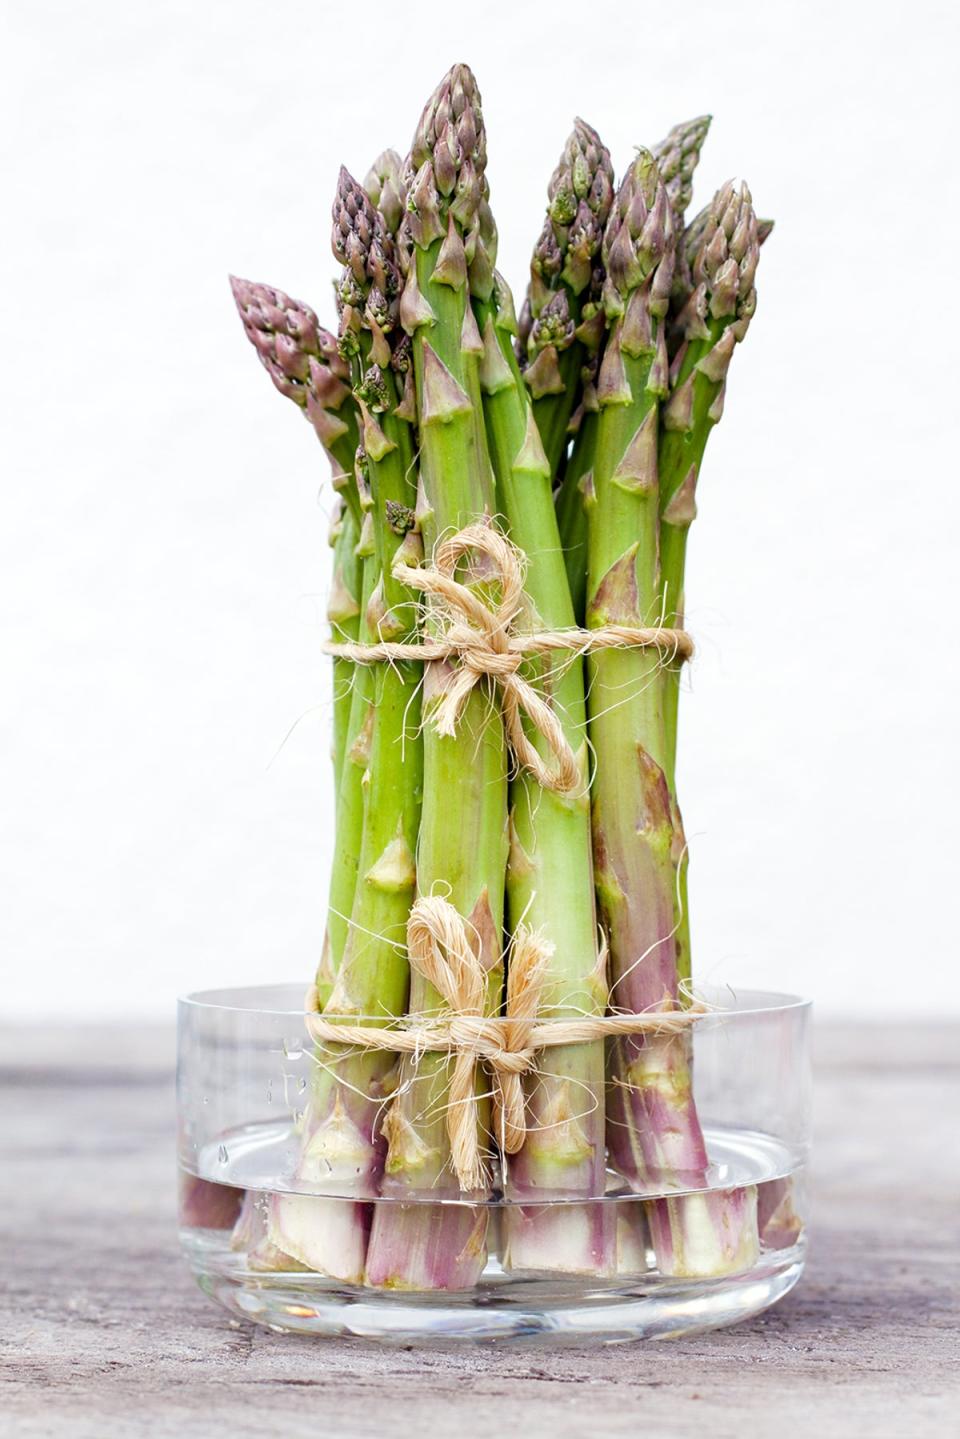 Reinvigorate sad asparagus by trimming the ends and placing upright in water (Getty/iStock)